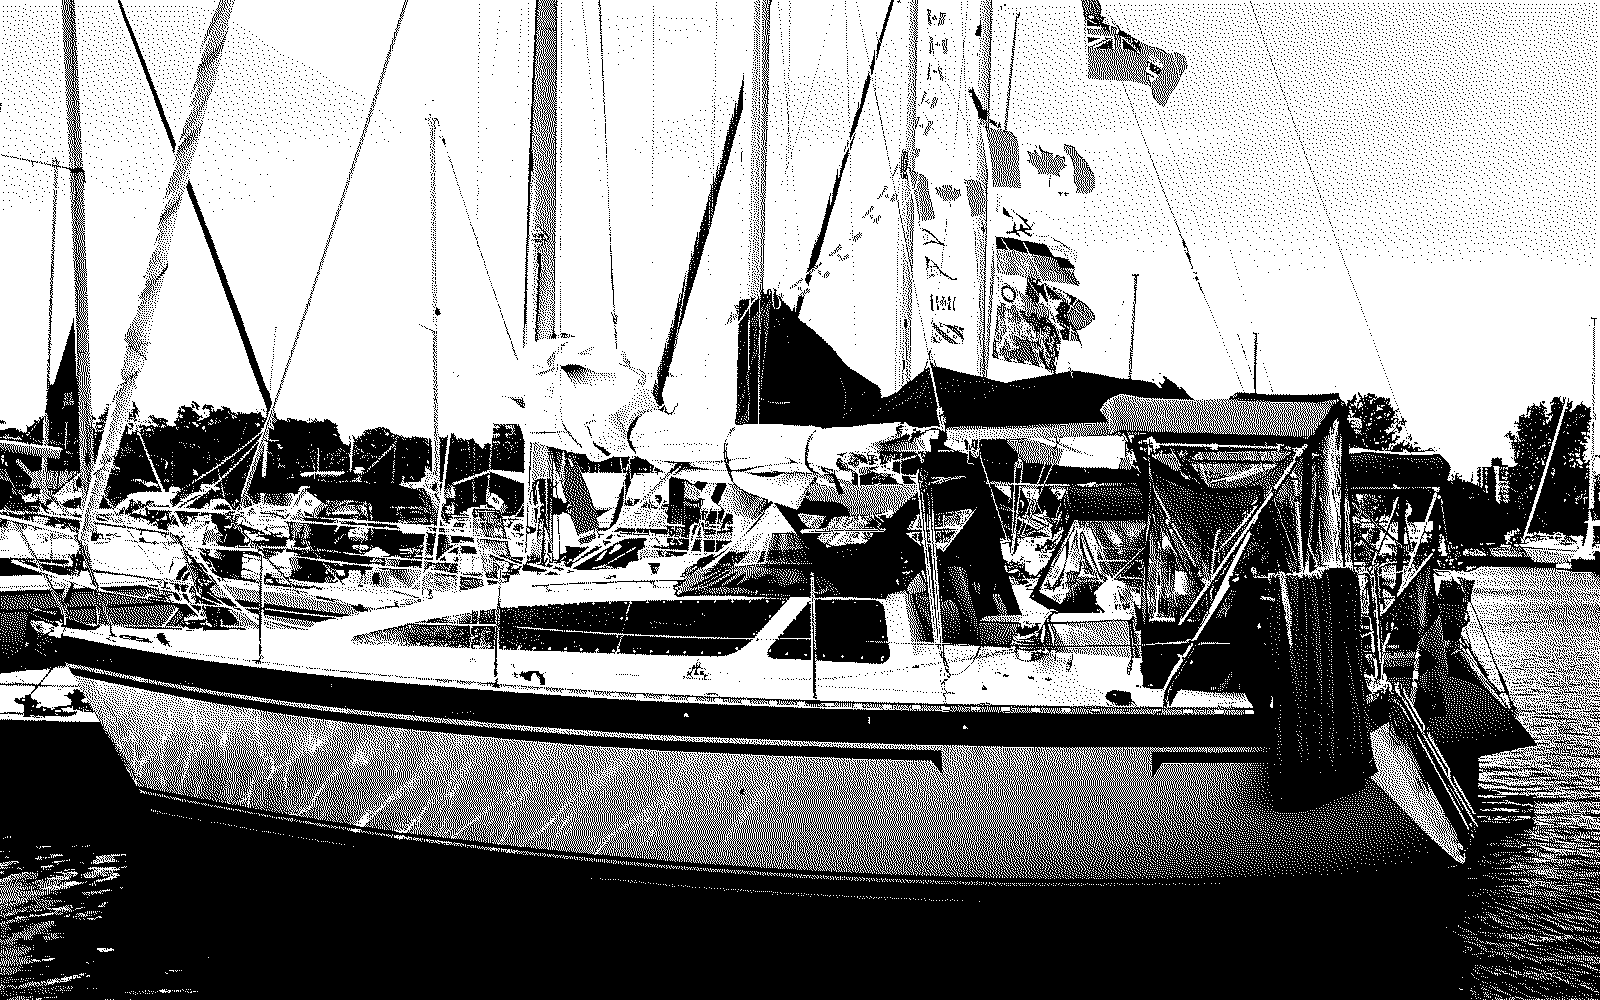 Sailboat at dock on Canada Day 2019